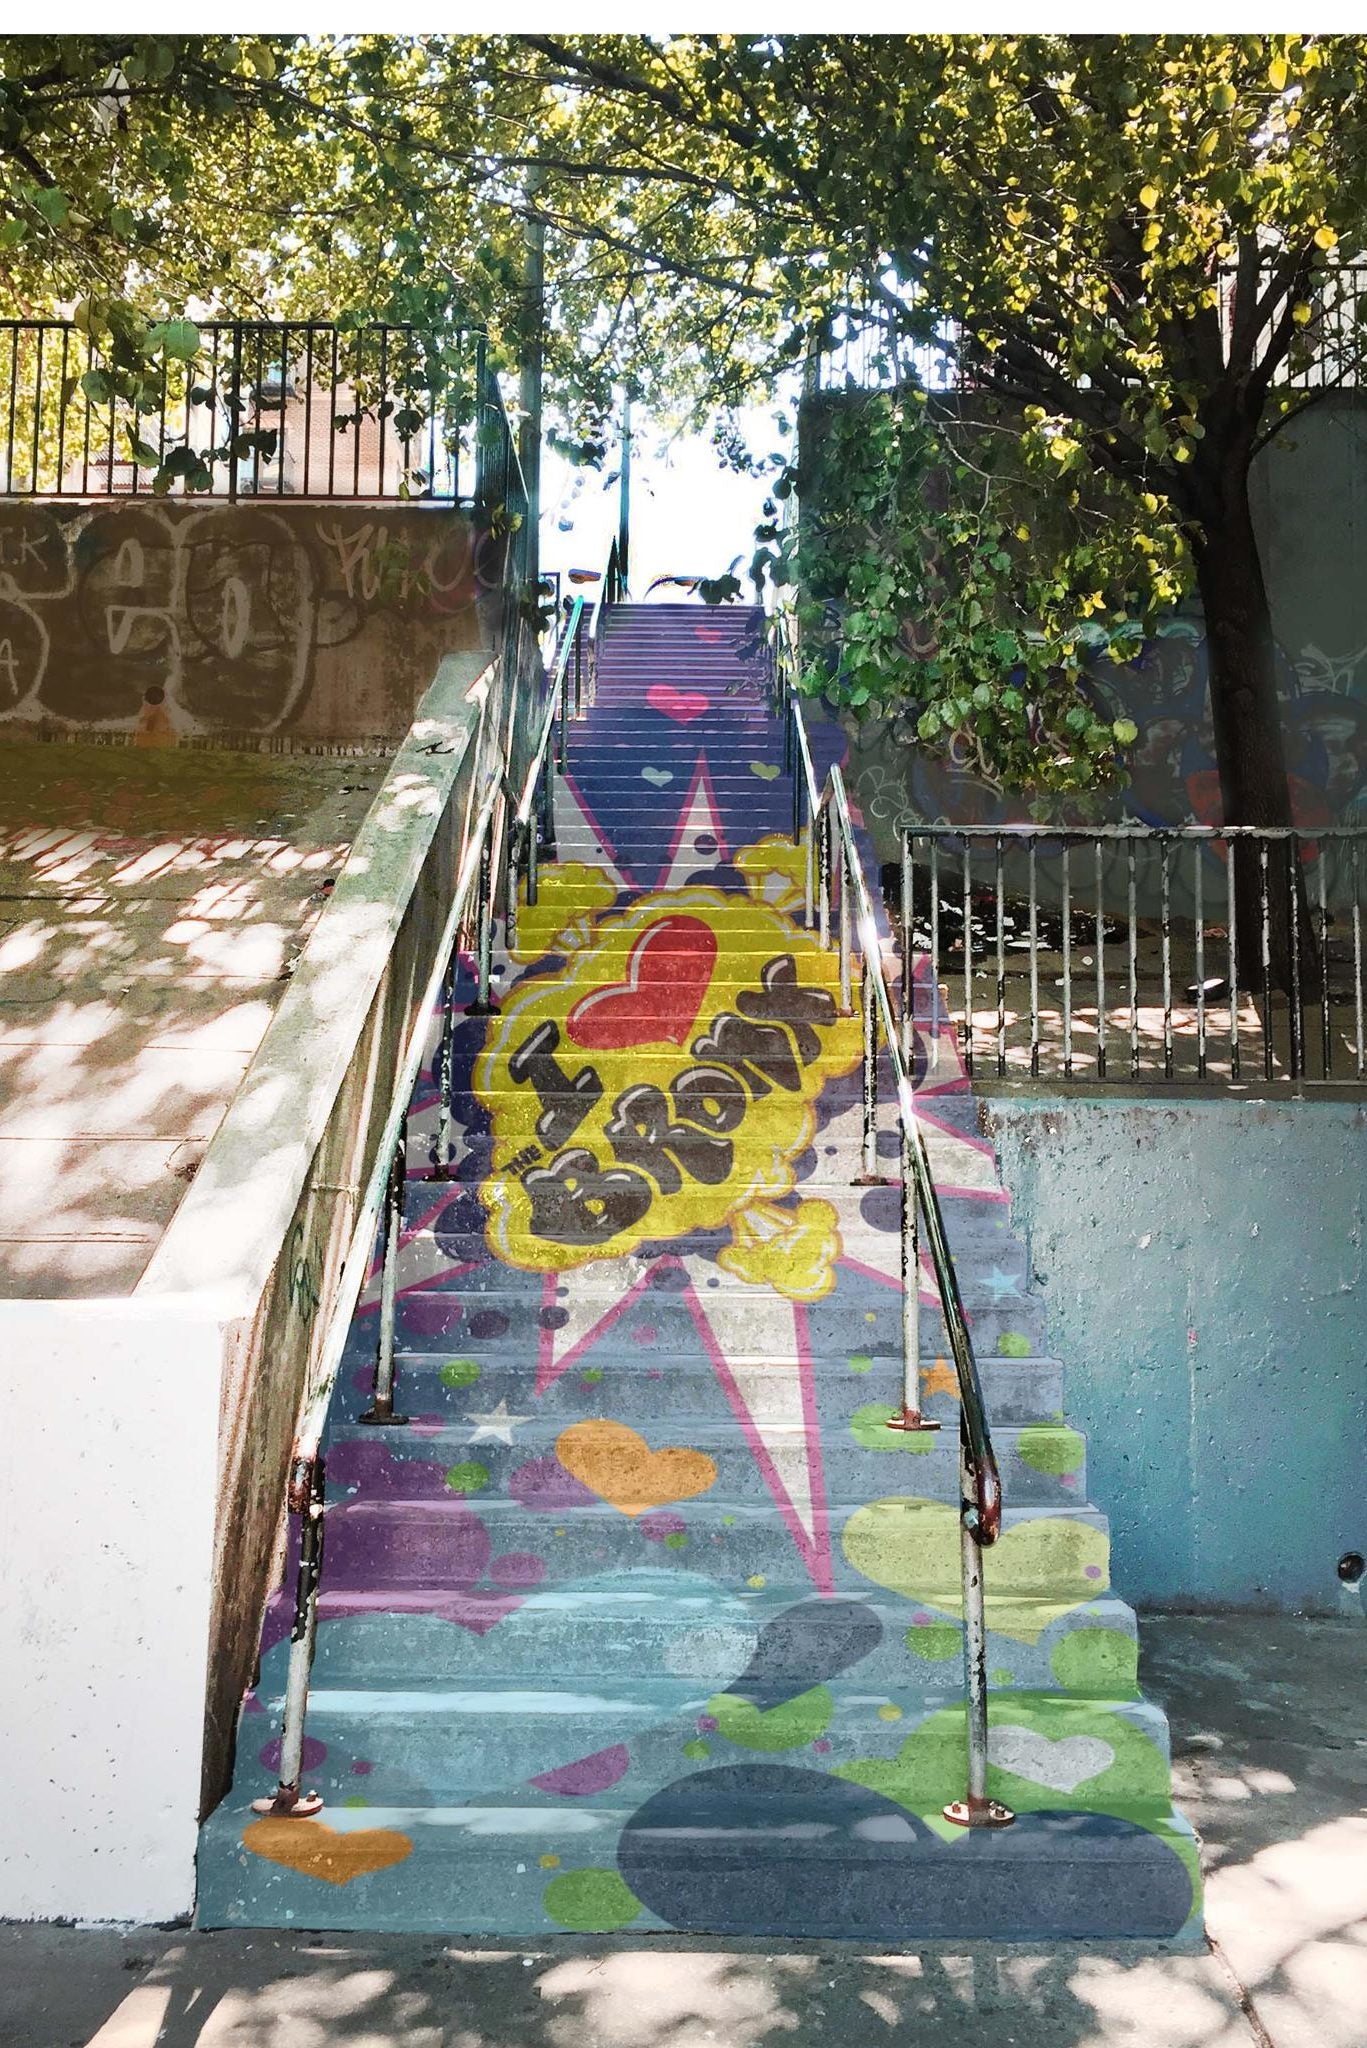 Artwork mural on stairs located in Bronx, NY